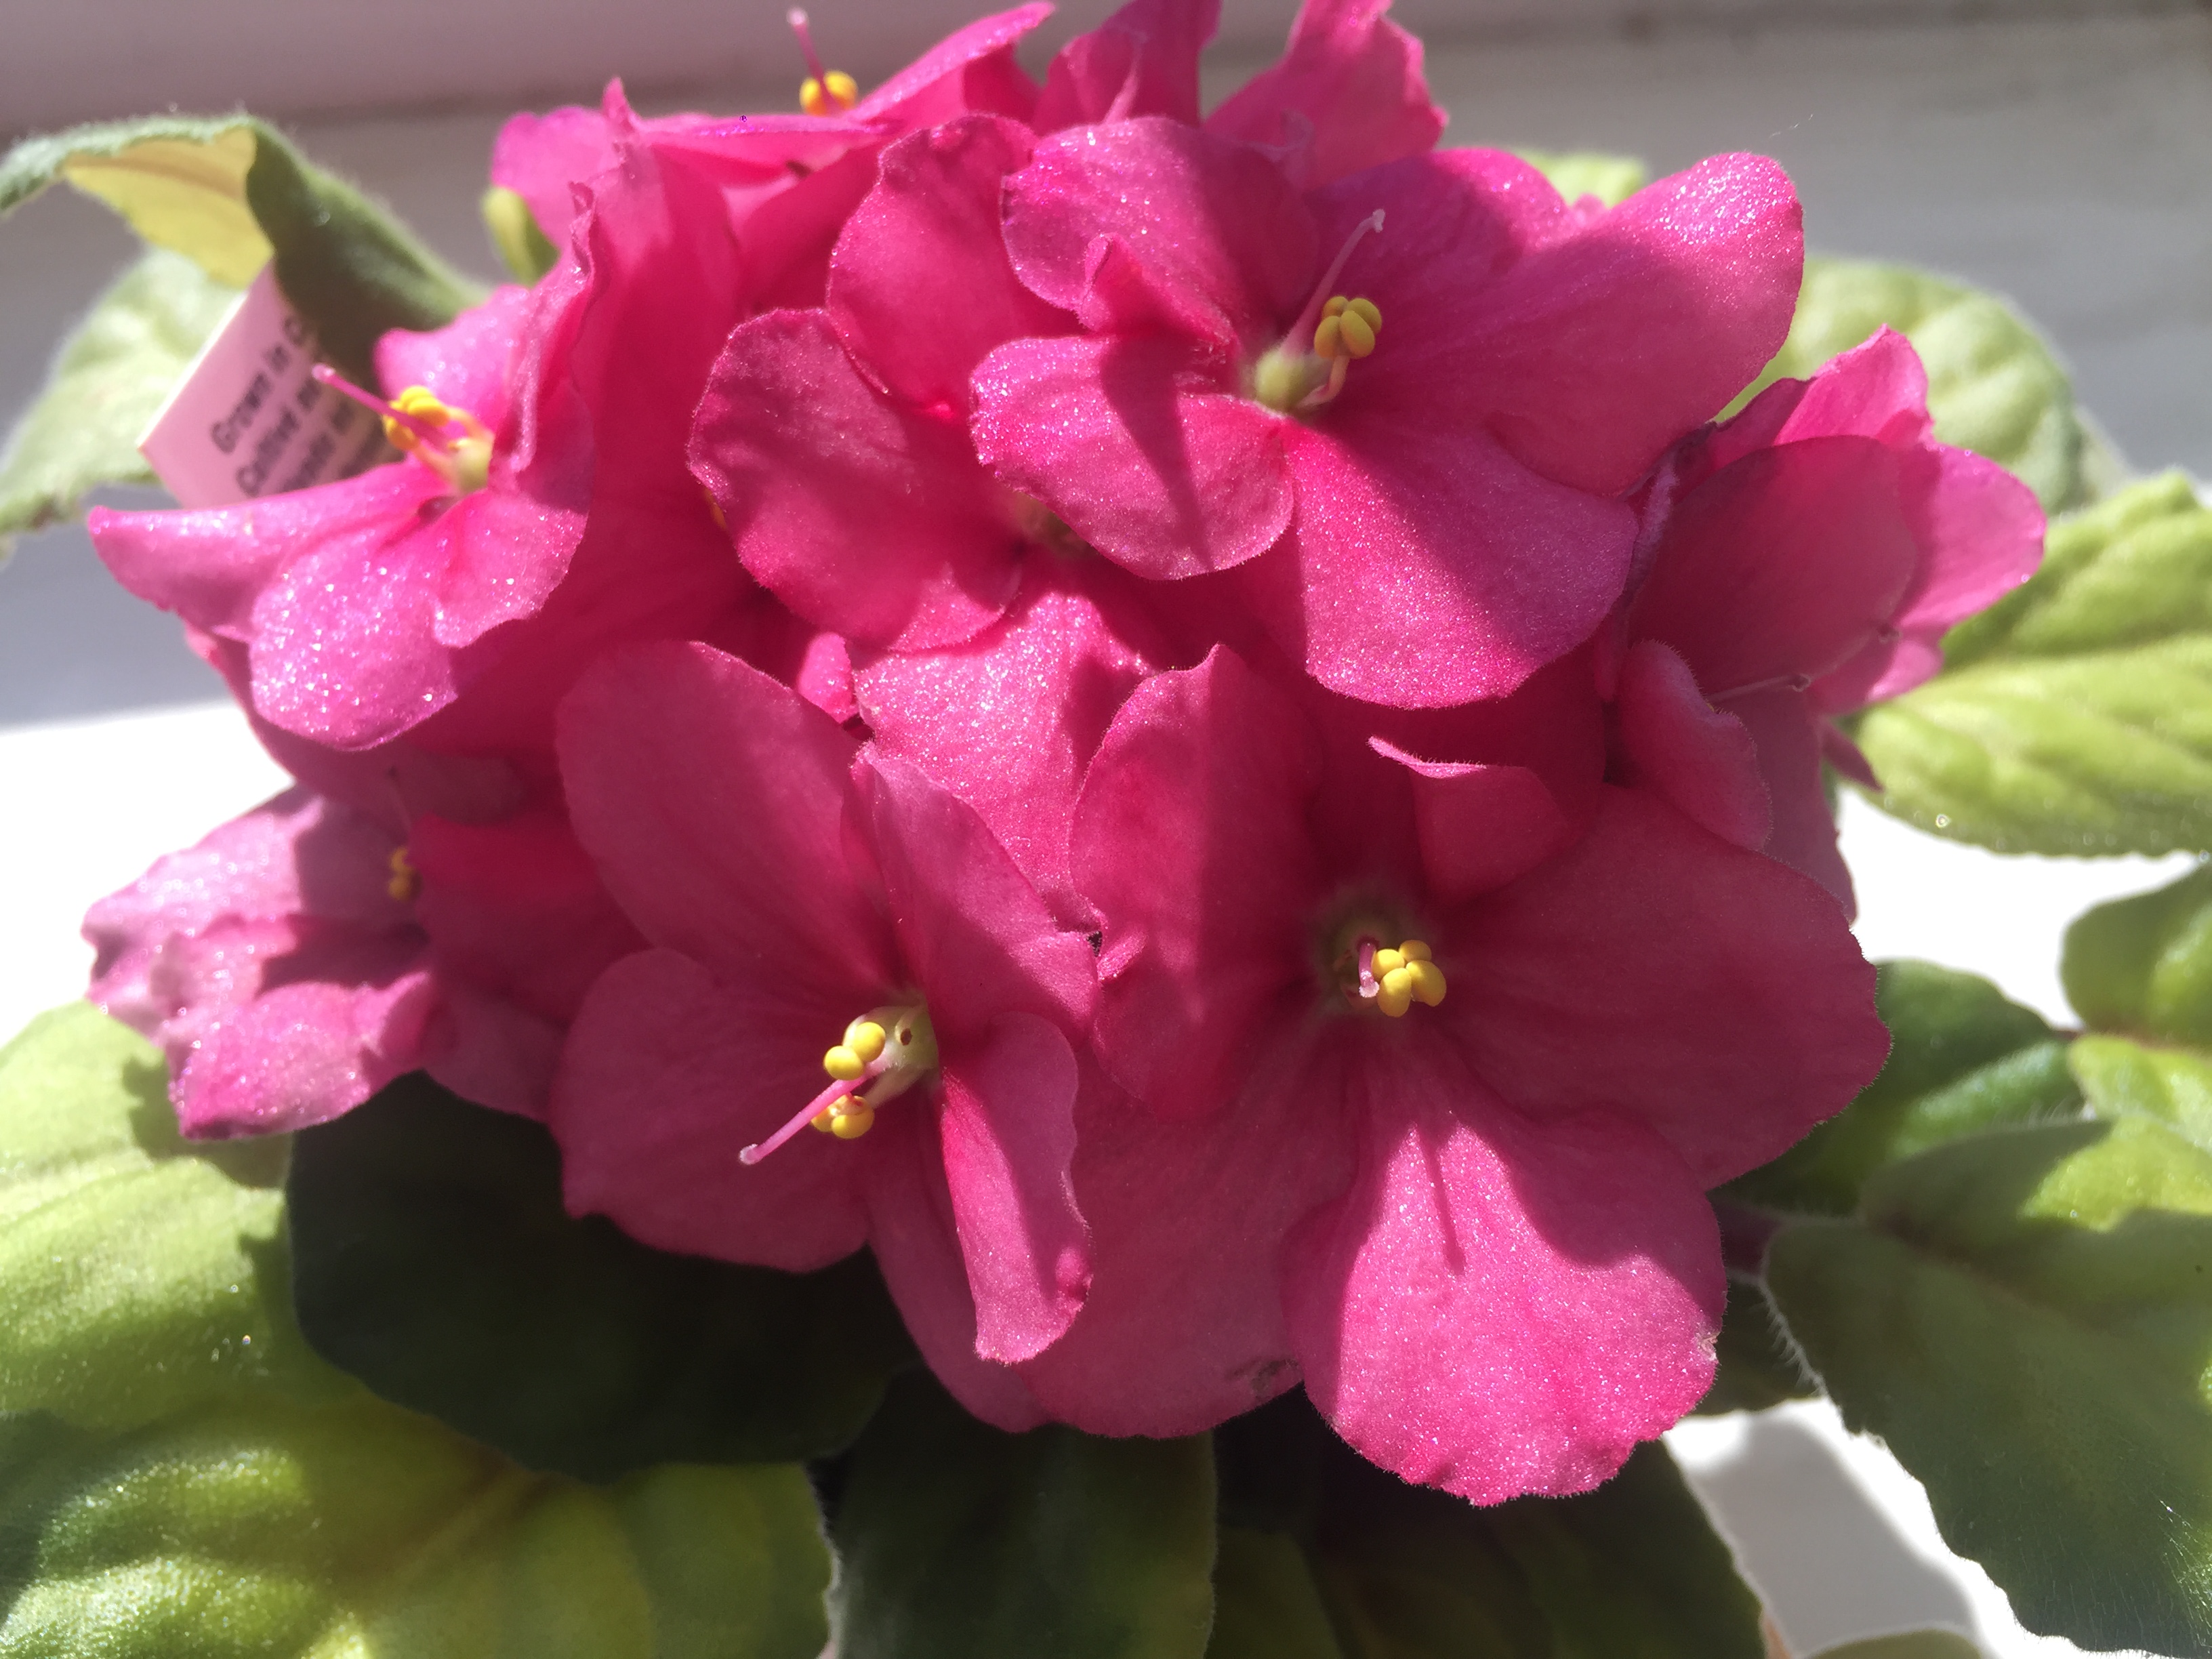 Plant African Violets for a Pop of Color | Espoma